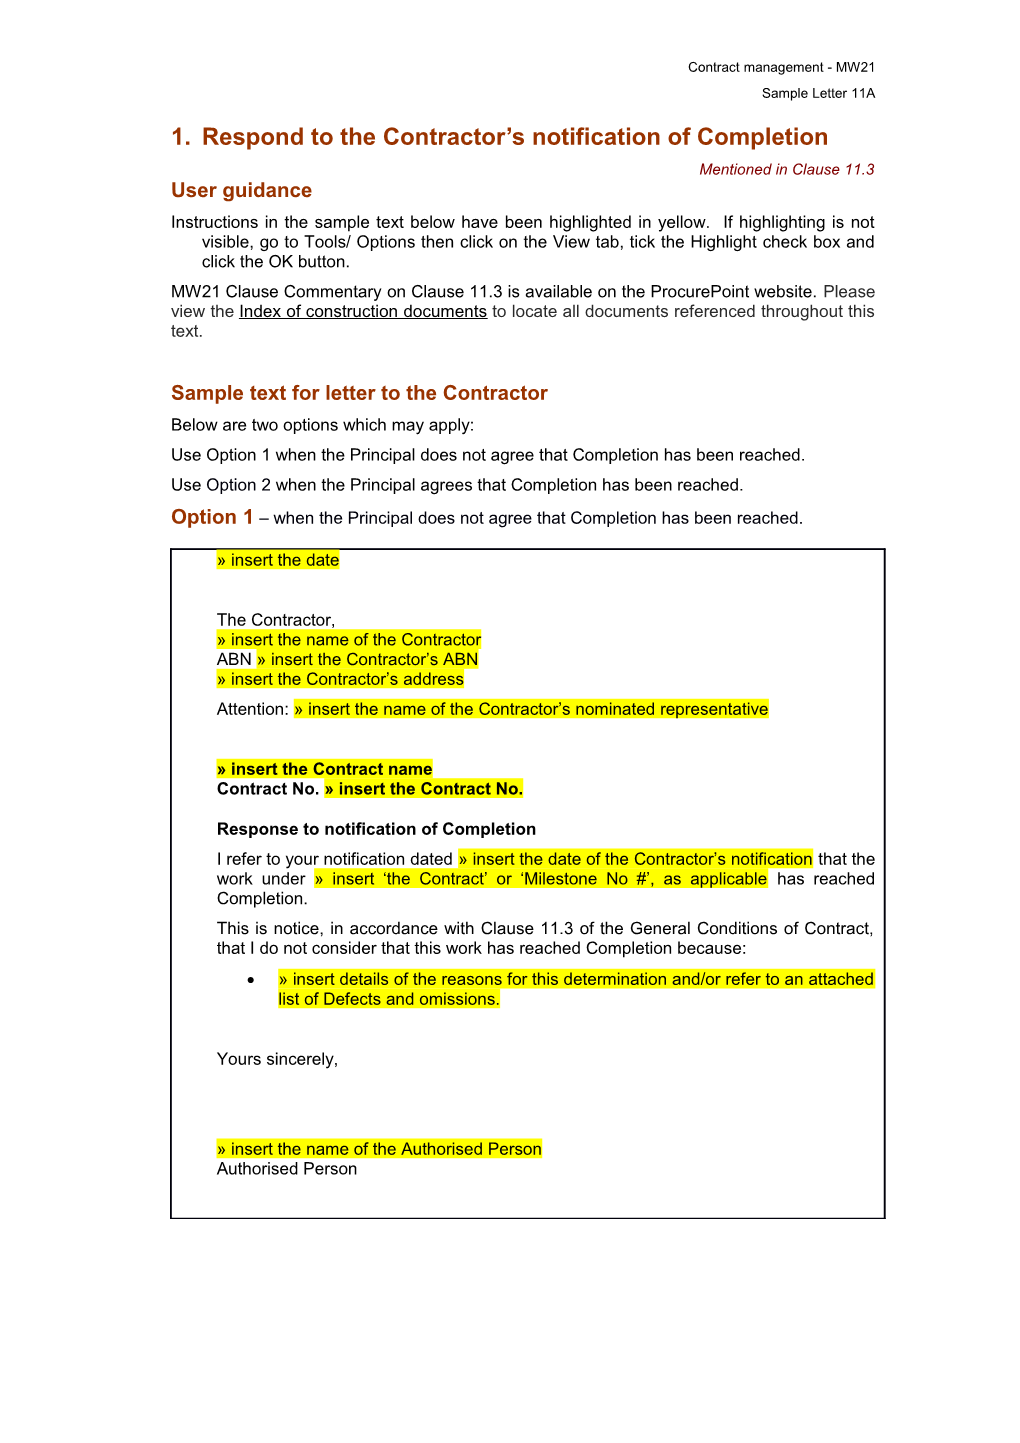 MW21 Sample Letter 11A - Respond to the Contractor S Notification of Completion